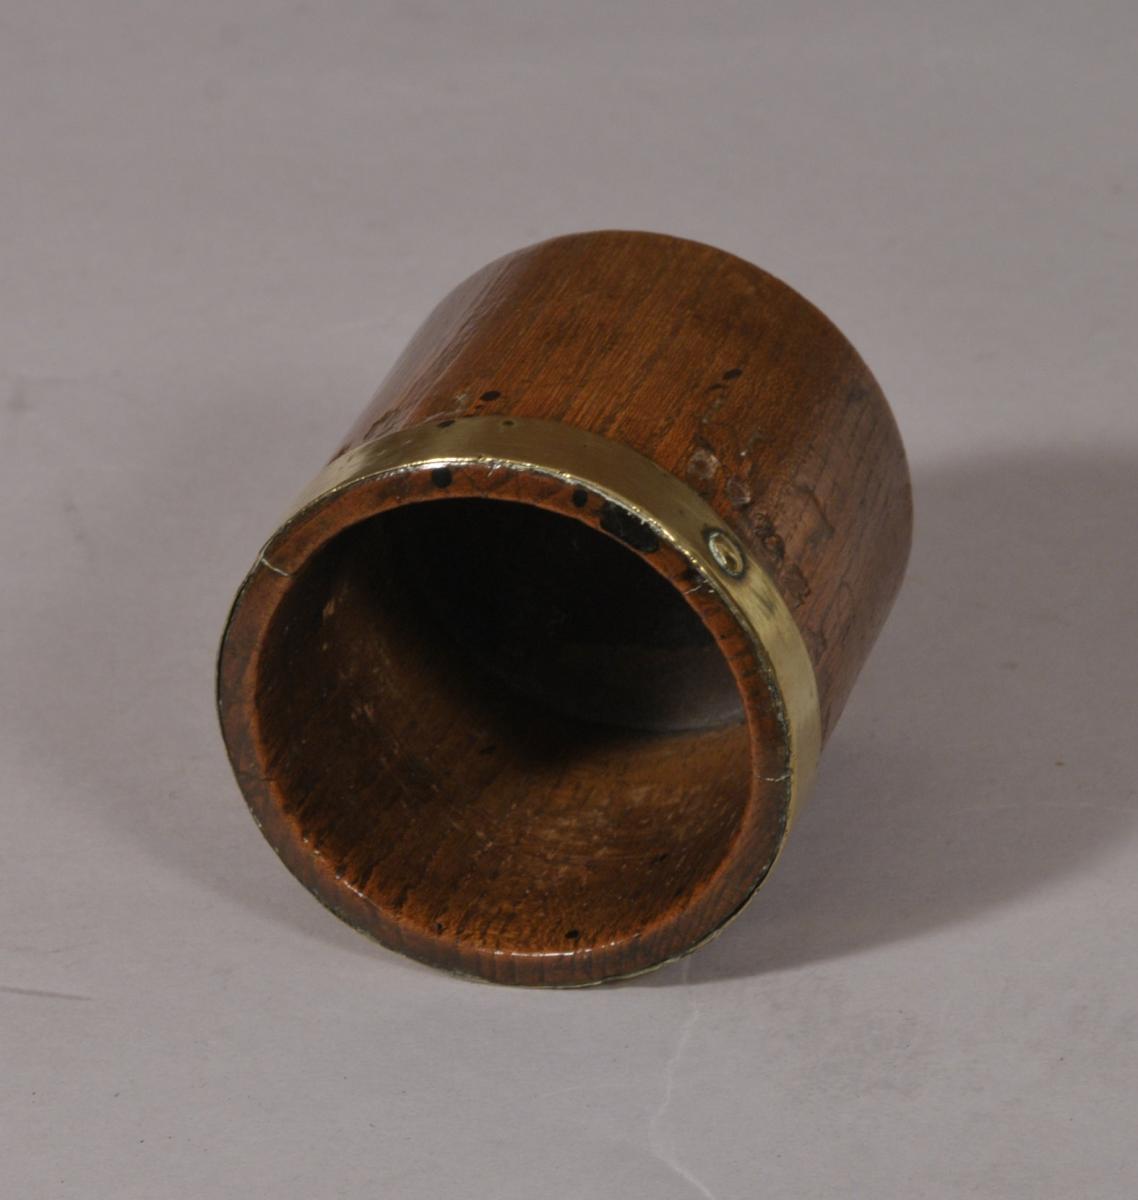 S/4887 Antique Treen 19th Century Ash Brass Rimmed Measure